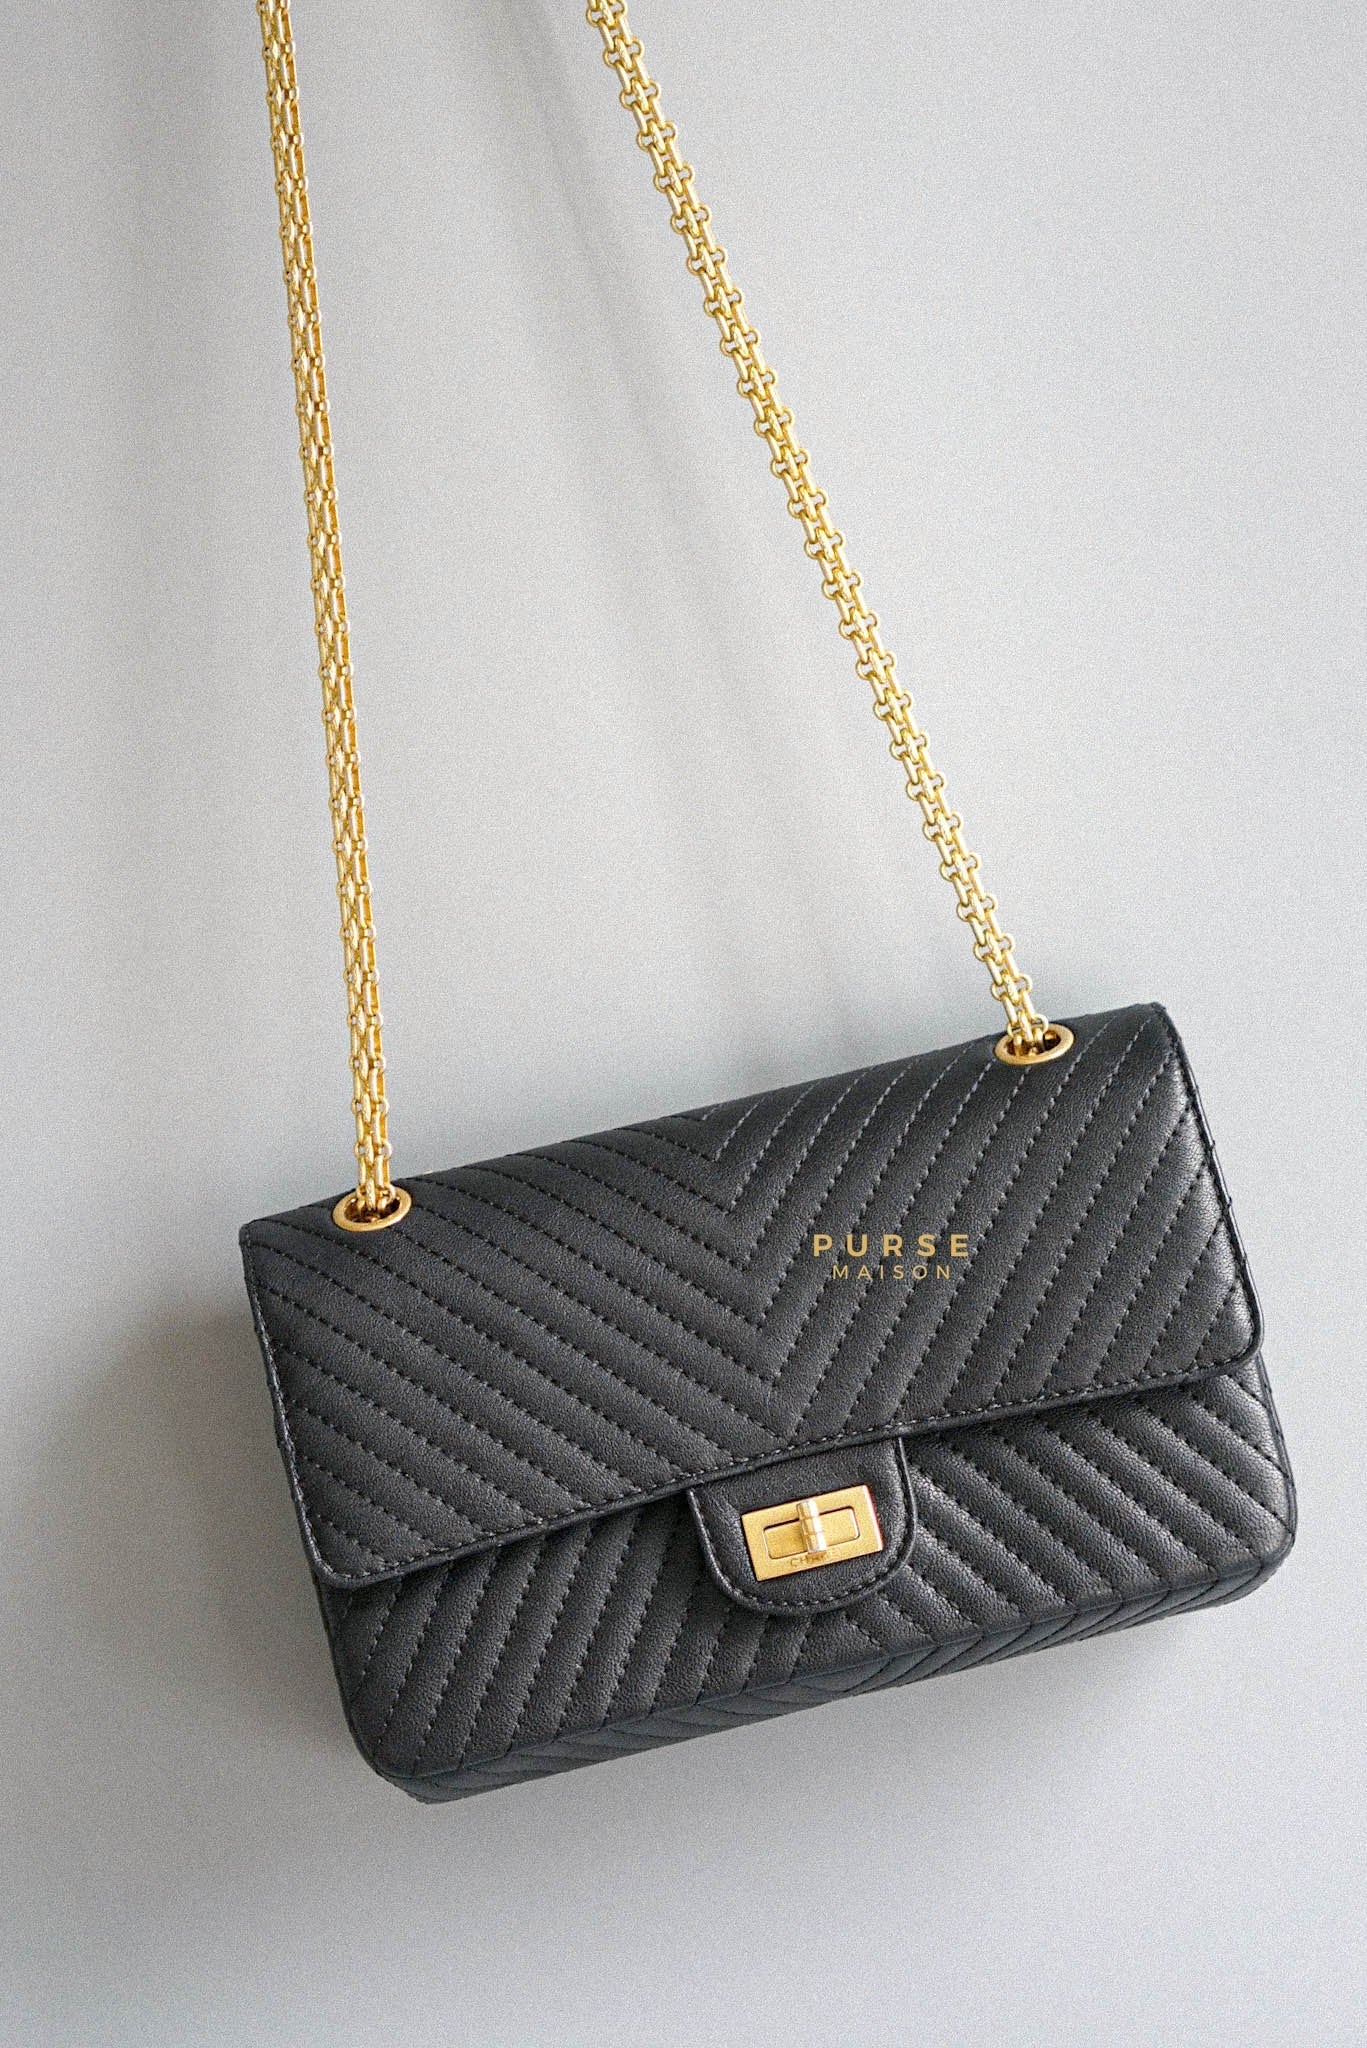 Chanel Reissue 2.55 in Black Calfskin Chevron Leather and Gold Hardware Series 23 (size 225) | Purse Maison Luxury Bags Shop